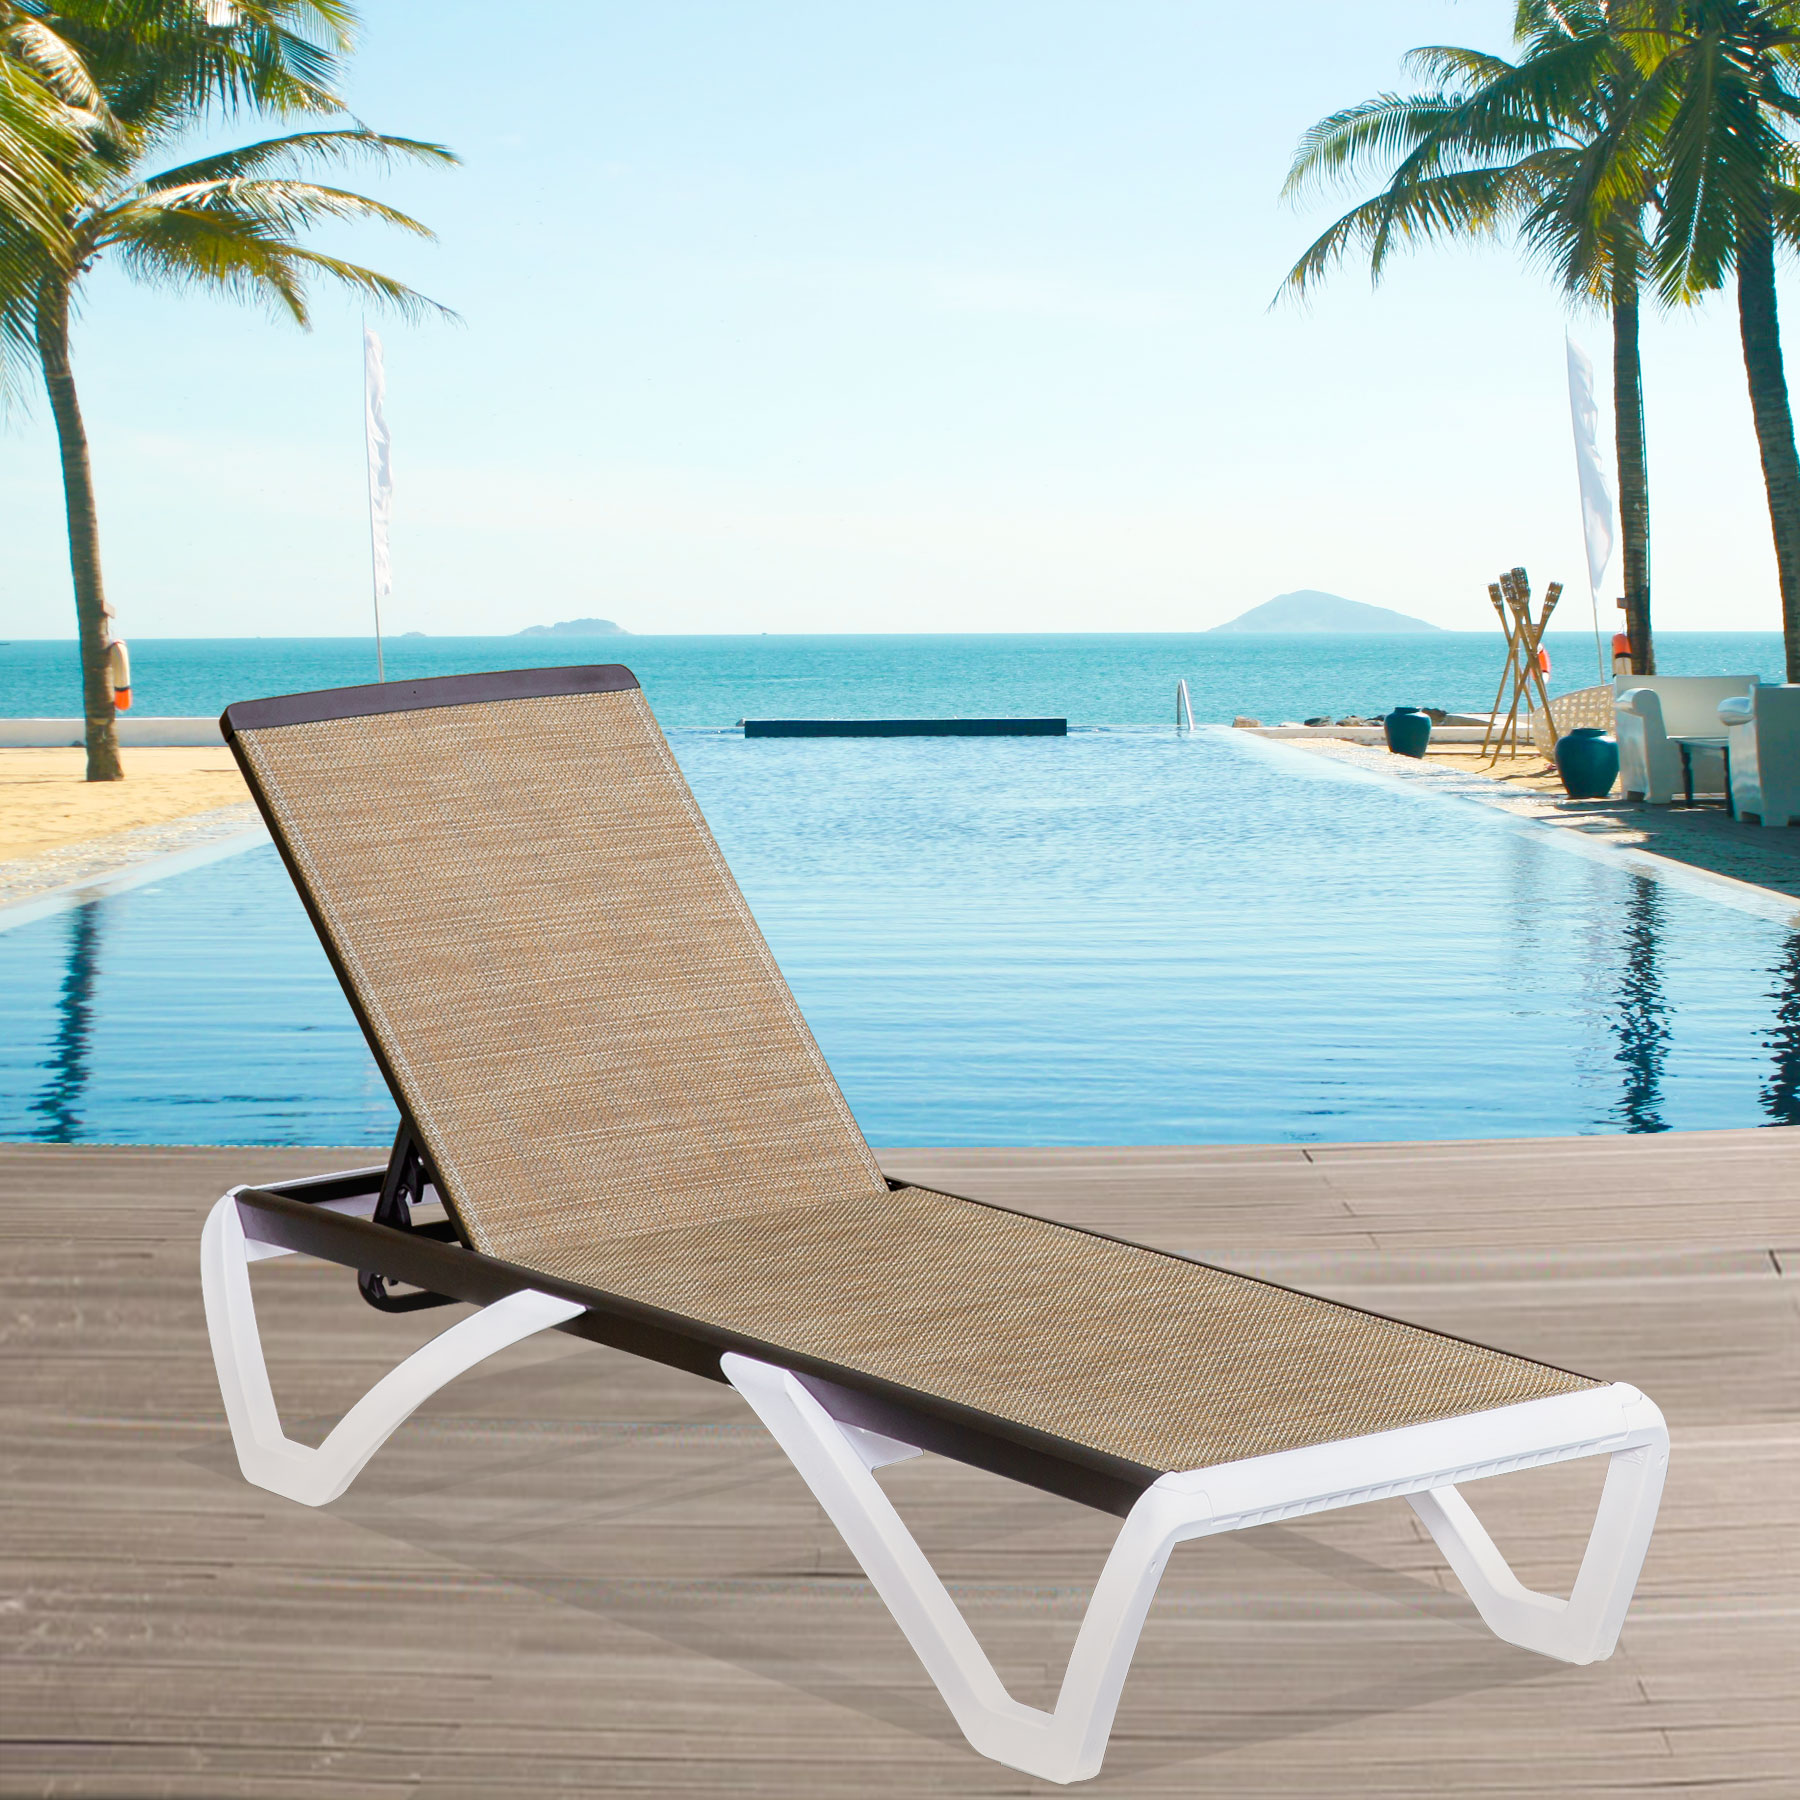 Domi Outdoor Living Adjustable Chaise Lounge Aluminum Outdoor Patio Lounge Chair All Weather Five-Position Recliner Chair for Patio,Pool,Beach,Yard(1 Brown Chair) - image 3 of 7